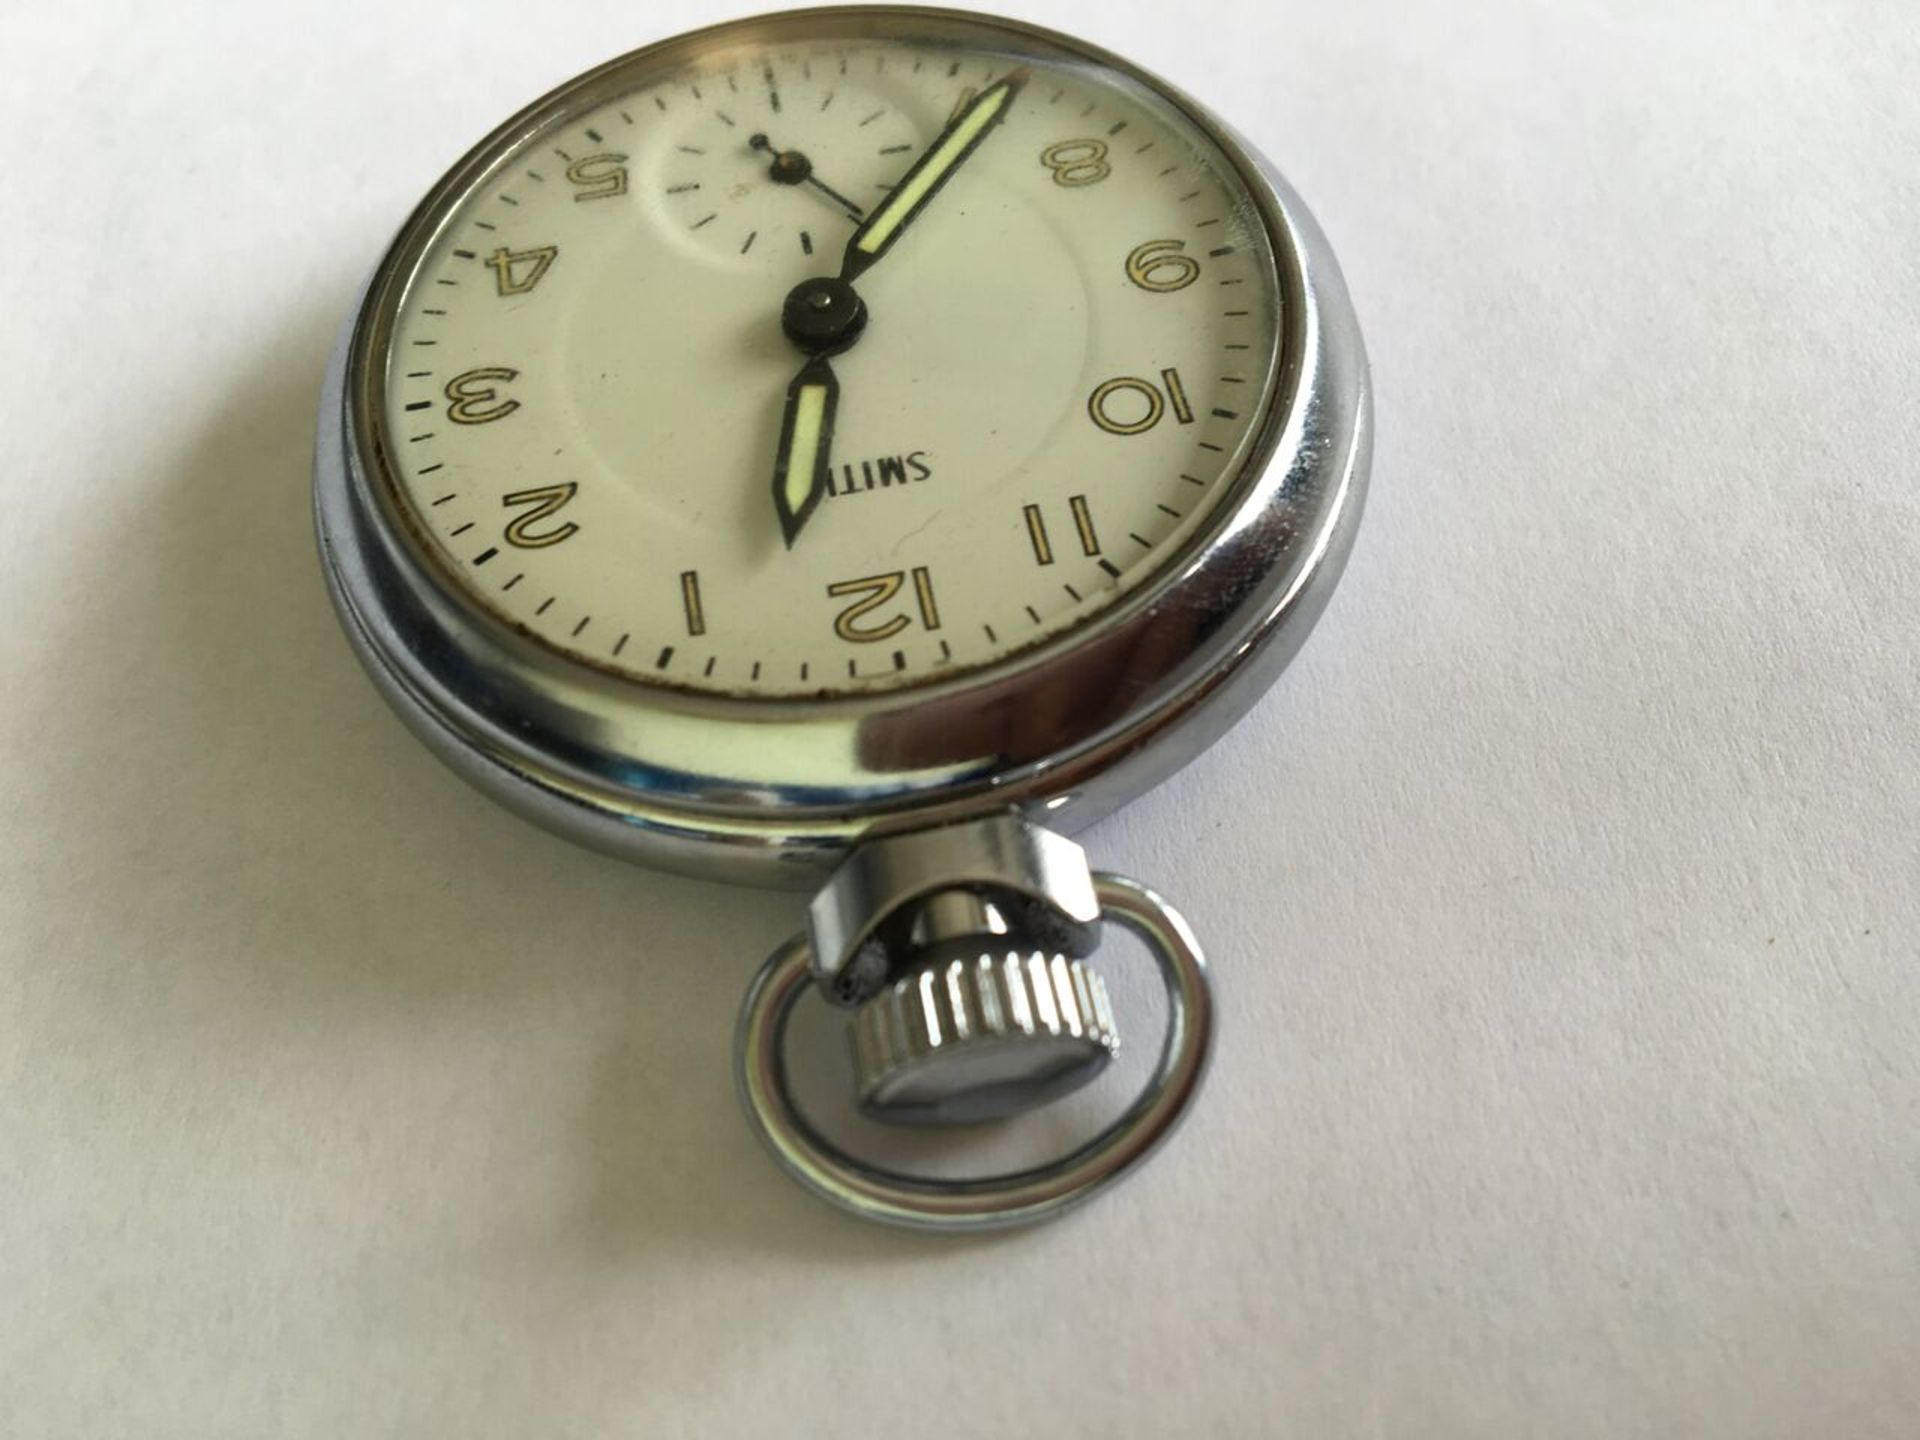 POCKET WATCH BY SMITHS IN CHROME CASE AND IN WORKING ORDER. FREE UK DELIVERY. NO VAT. - Image 3 of 3